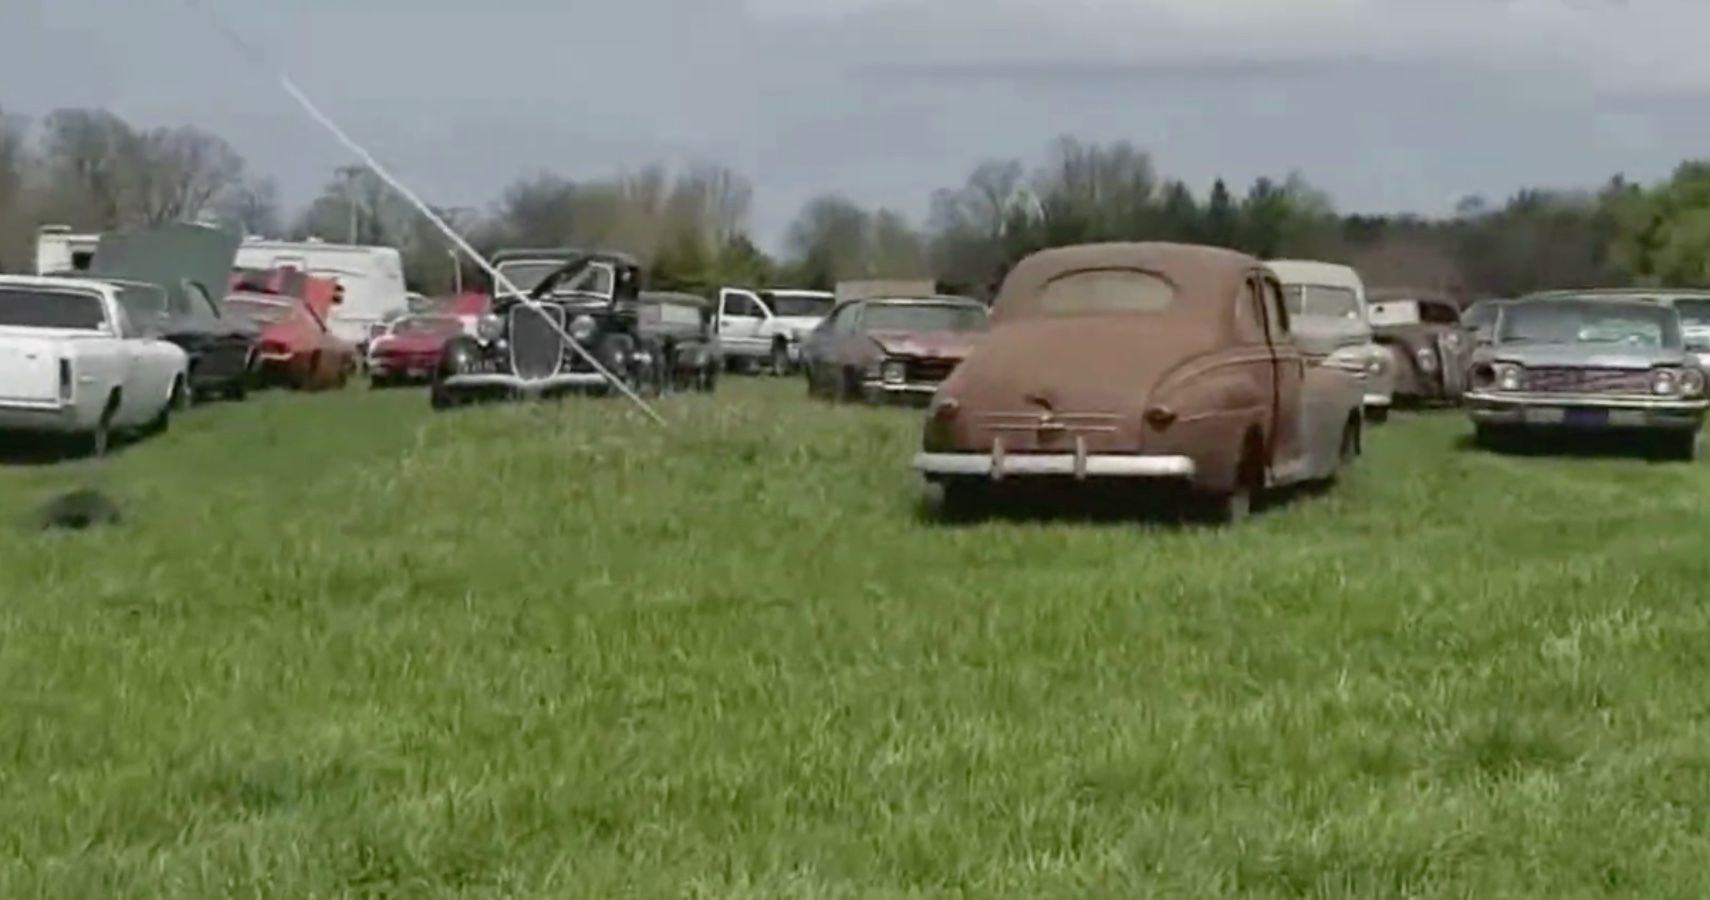 Field of Cars and barn finds, view of collection from distance